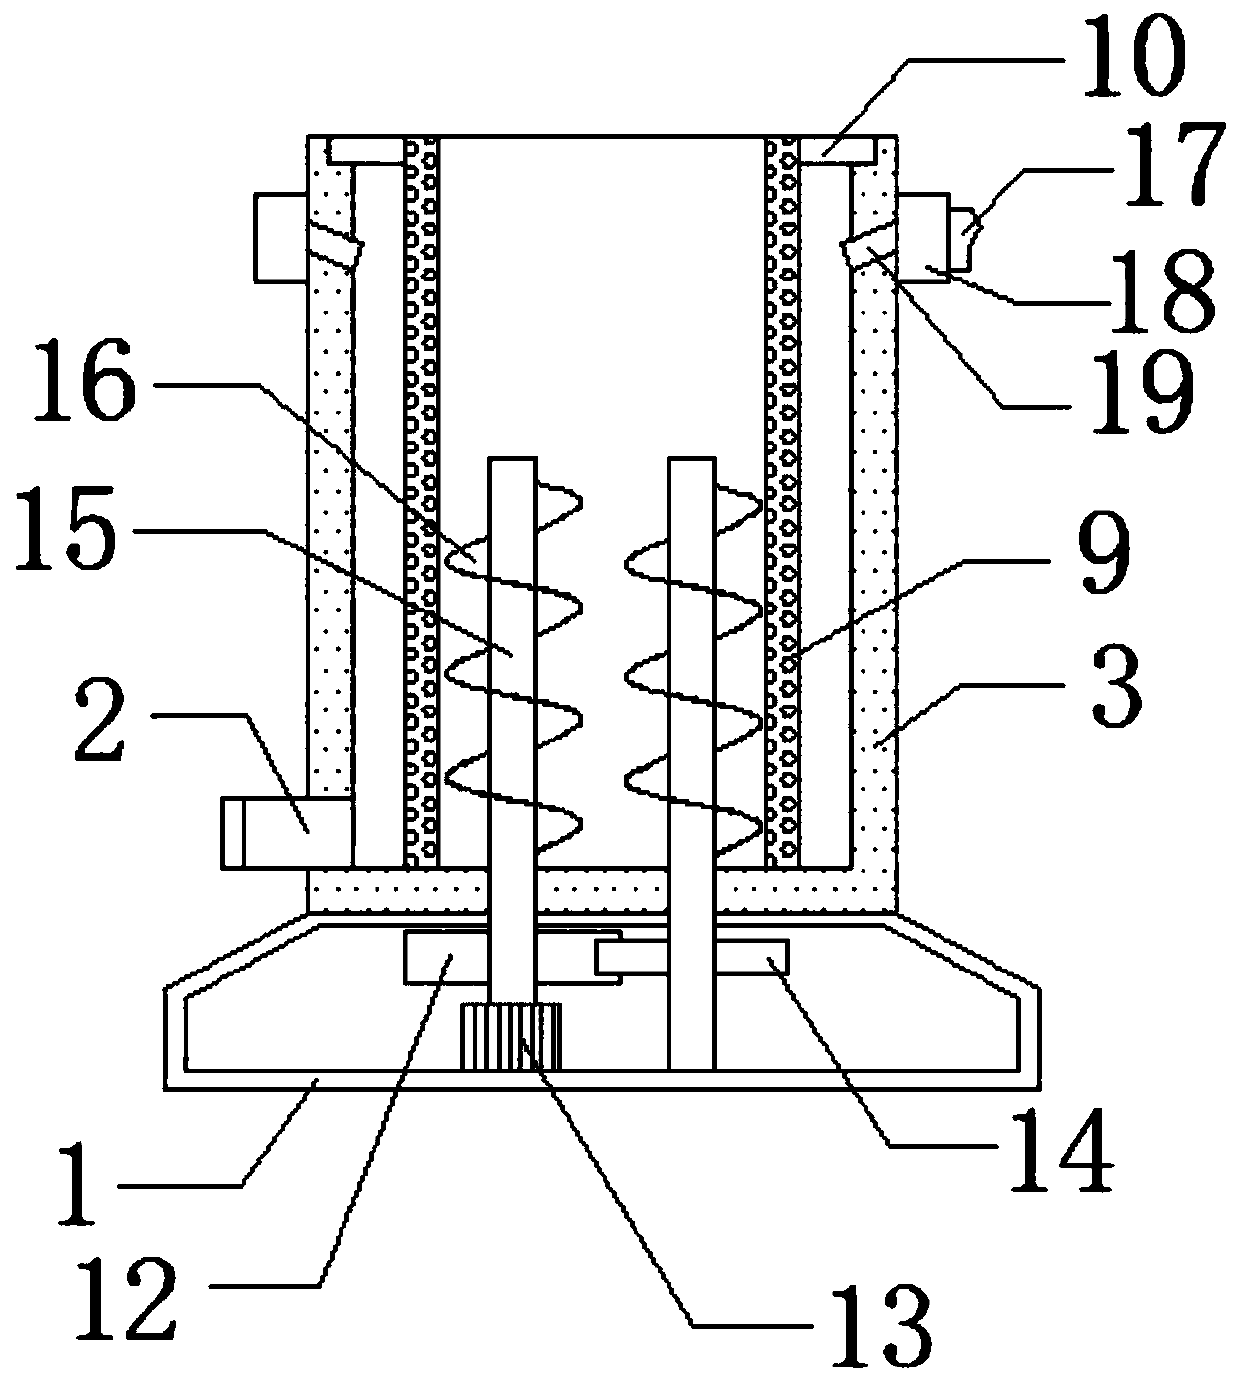 Juice squeezing device for agricultural product processing